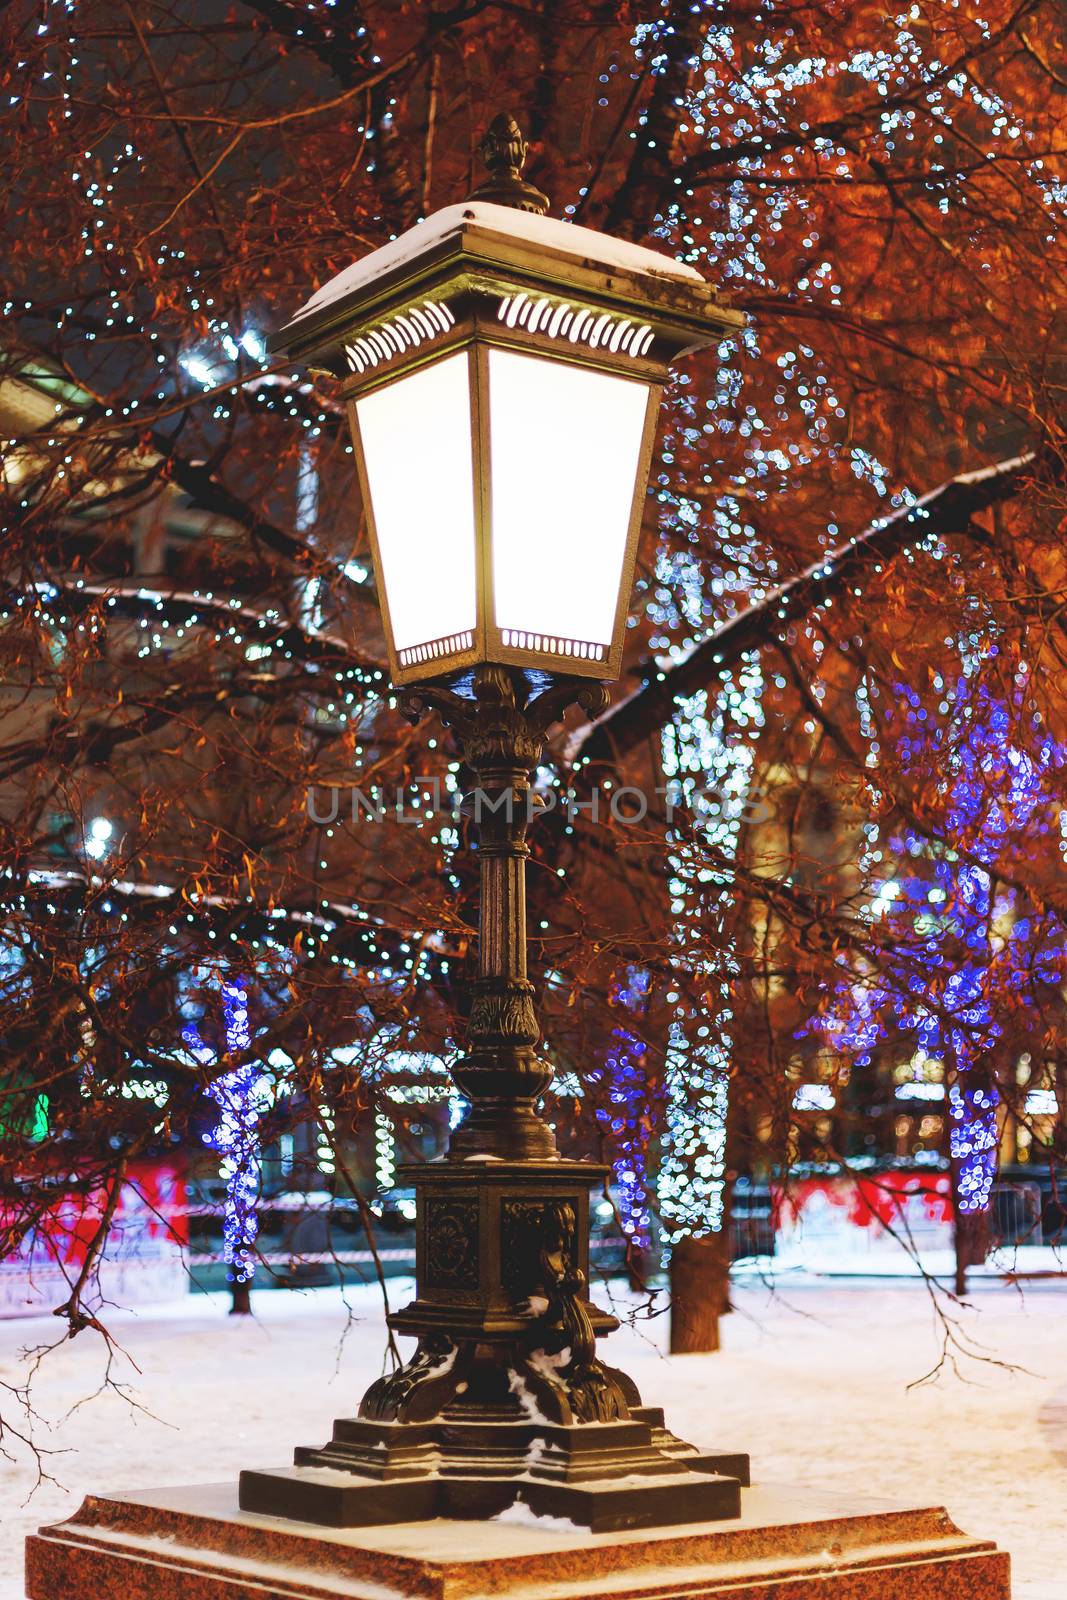 Old fashioned lantern on street. Trees are decorated for New Year and Christmas celebration. Moscow, Russia. by aksenovko